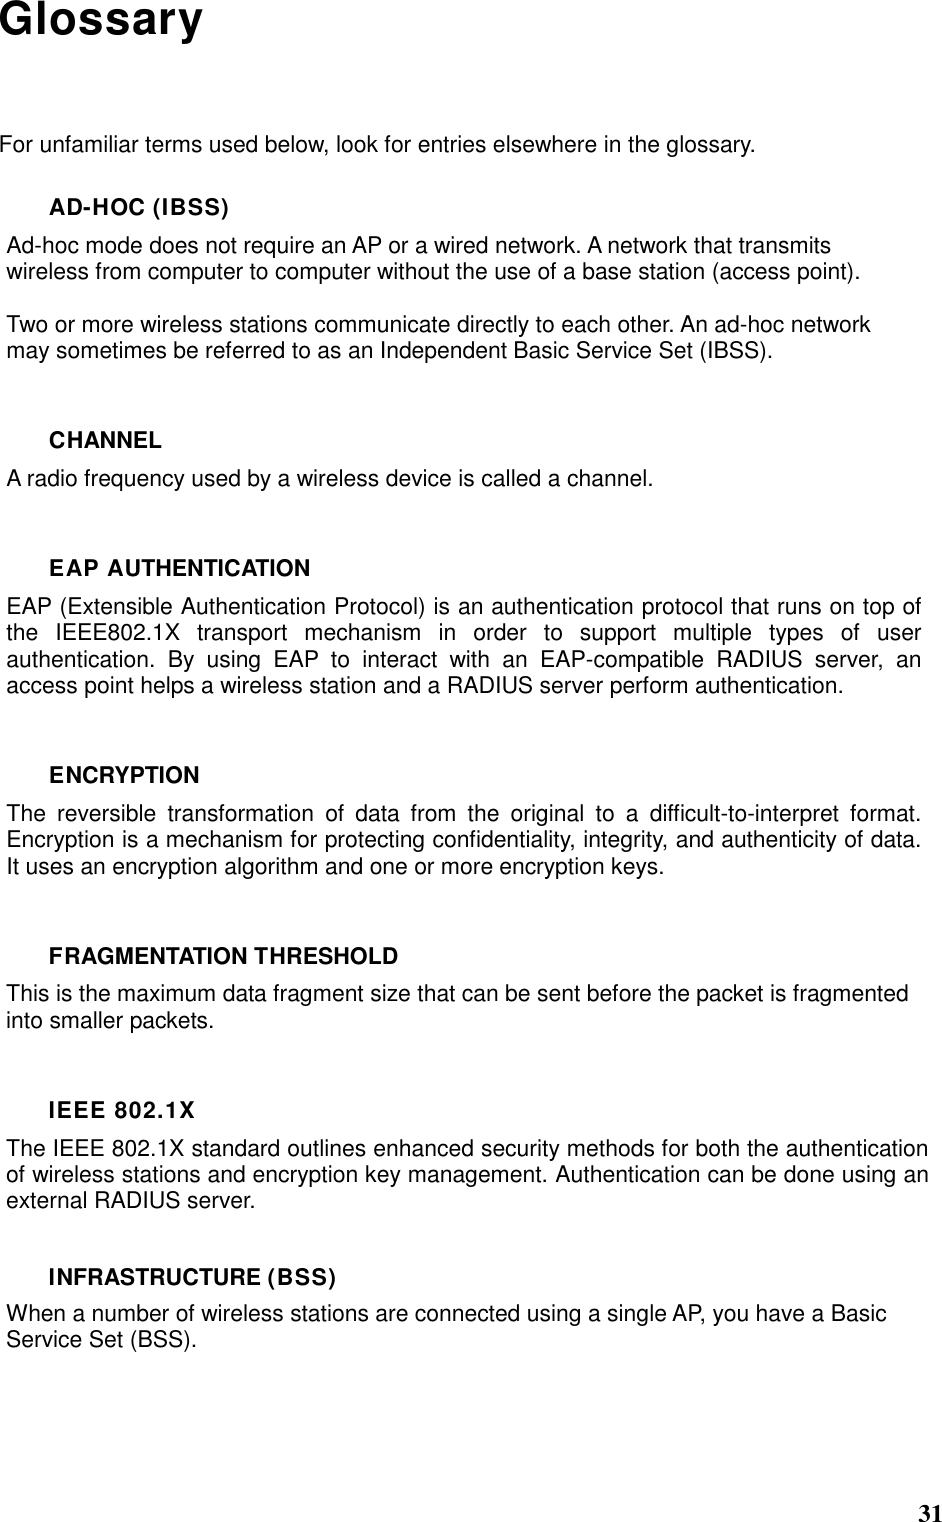  31 Glossary For unfamiliar terms used below, look for entries elsewhere in the glossary. AD-HOC (IBSS) Ad-hoc mode does not require an AP or a wired network. A network that transmits wireless from computer to computer without the use of a base station (access point).  Two or more wireless stations communicate directly to each other. An ad-hoc network may sometimes be referred to as an Independent Basic Service Set (IBSS).  CHANNEL A radio frequency used by a wireless device is called a channel.  EAP AUTHENTICATION EAP (Extensible Authentication Protocol) is an authentication protocol that runs on top of the  IEEE802.1X  transport  mechanism  in  order  to  support  multiple  types  of  user authentication.  By  using  EAP  to  interact  with  an  EAP-compatible  RADIUS  server,  an access point helps a wireless station and a RADIUS server perform authentication.  ENCRYPTION The  reversible  transformation  of  data  from  the  original  to  a  difficult-to-interpret  format. Encryption is a mechanism for protecting confidentiality, integrity, and authenticity of data. It uses an encryption algorithm and one or more encryption keys.  FRAGMENTATION THRESHOLD This is the maximum data fragment size that can be sent before the packet is fragmented into smaller packets.  IEEE 802.1X The IEEE 802.1X standard outlines enhanced security methods for both the authentication of wireless stations and encryption key management. Authentication can be done using an external RADIUS server.  INFRASTRUCTURE (BSS) When a number of wireless stations are connected using a single AP, you have a Basic Service Set (BSS).   